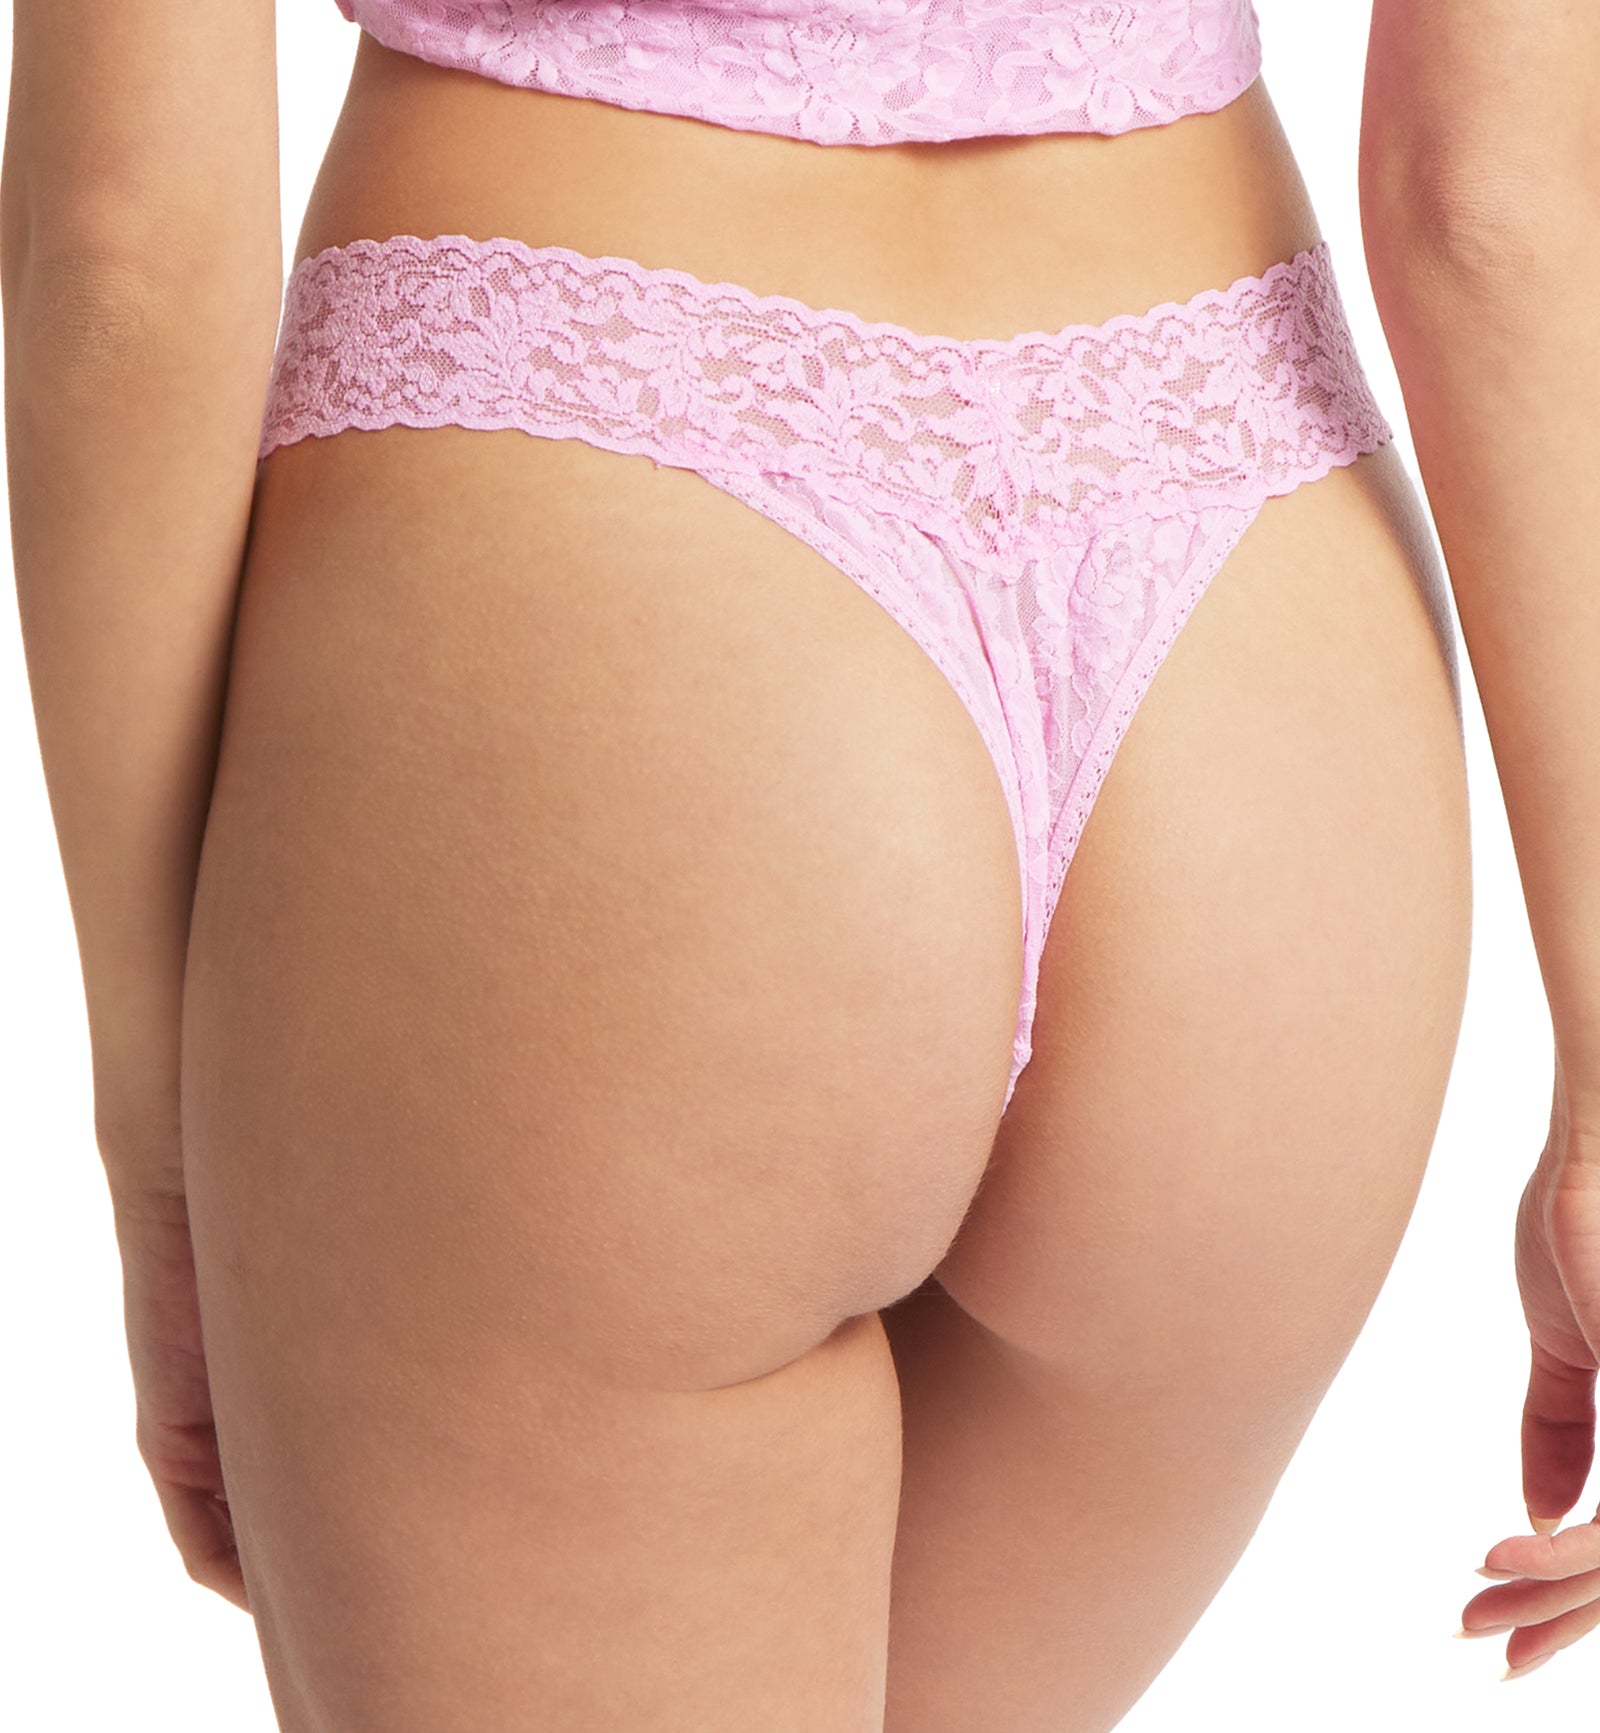 Hanky Panky Signature Lace Original Rise Thong (4811P),Cotton Candy - Cotton Candy,One Size